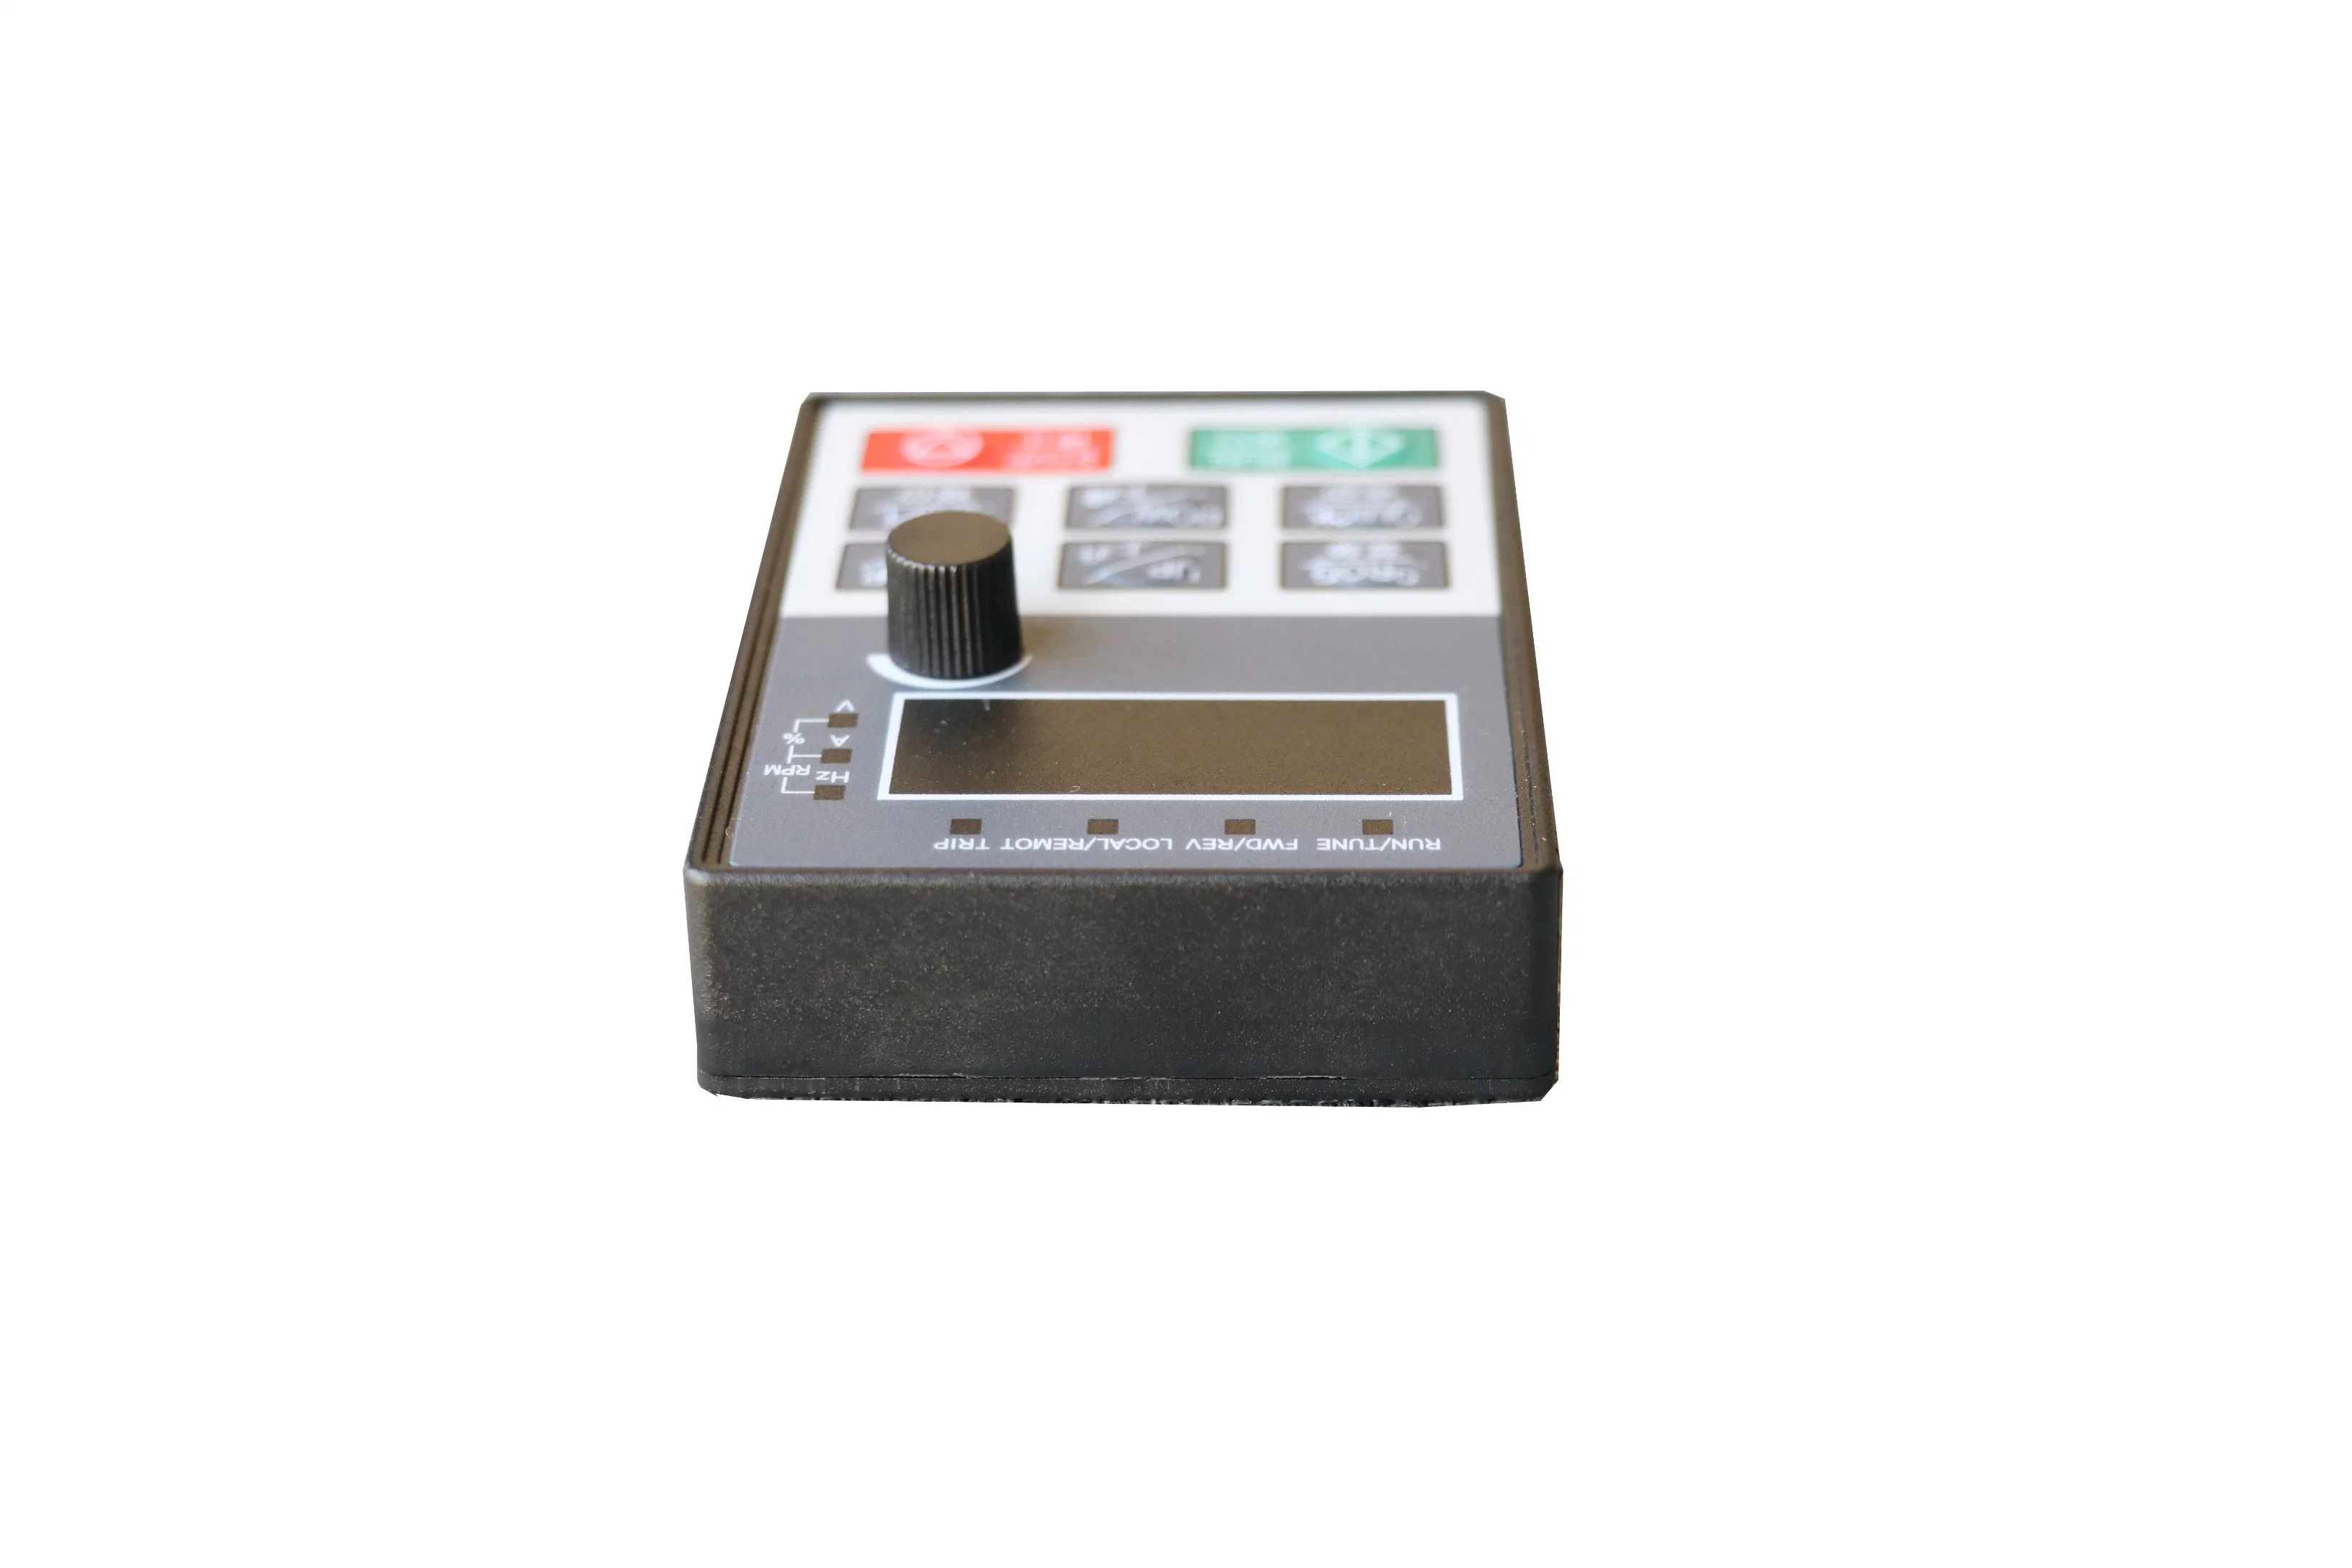 Ad200 Series Three Phase 380V 0.75kw/1.5kw/2.2kw/4kw Economical Universal Frequency Converter Including Braking Unit